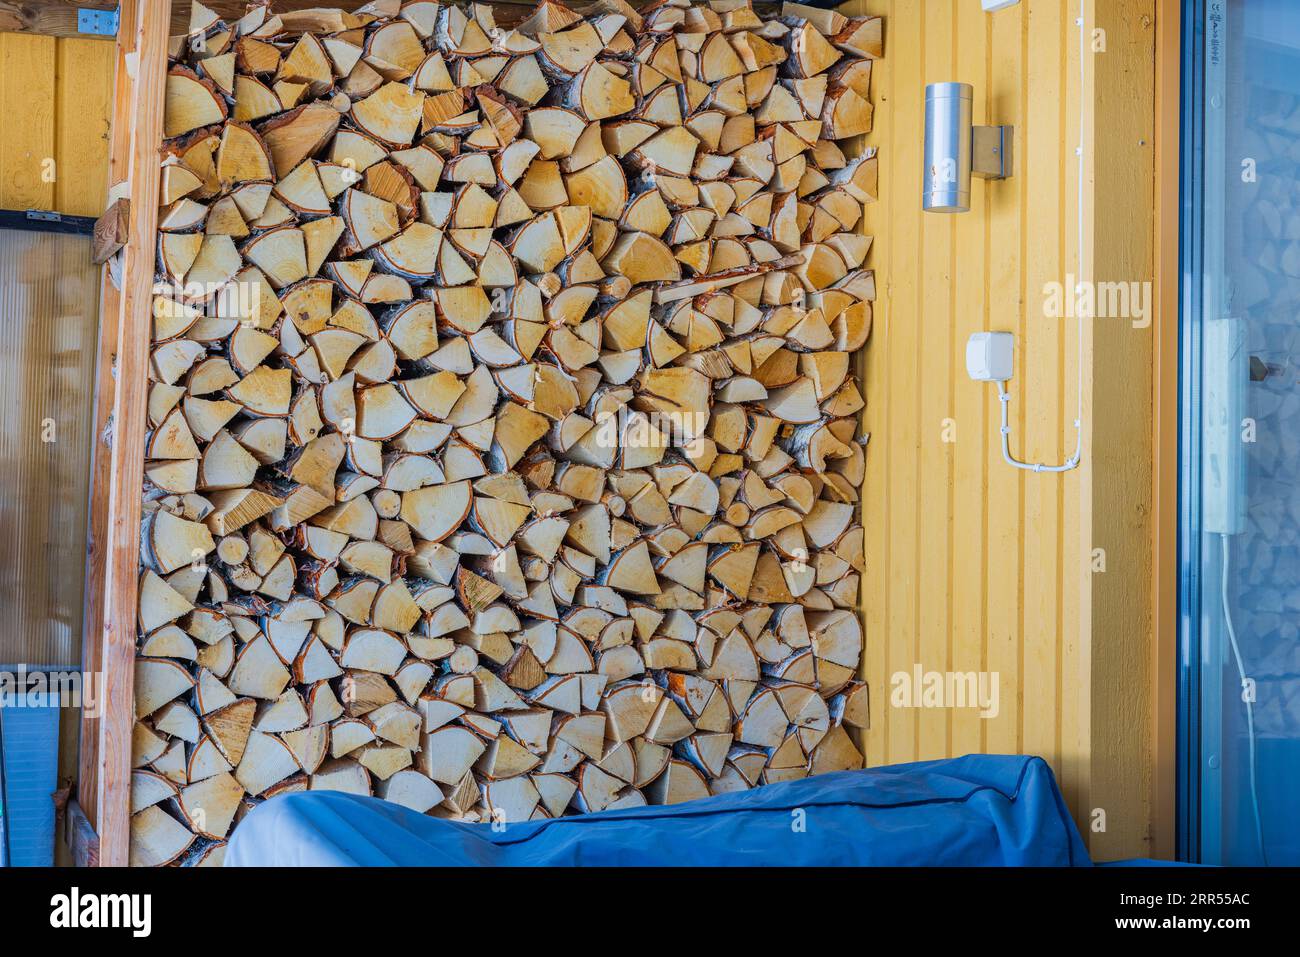 Close-up view of firewood rack prepared for cold season. Stock Photo